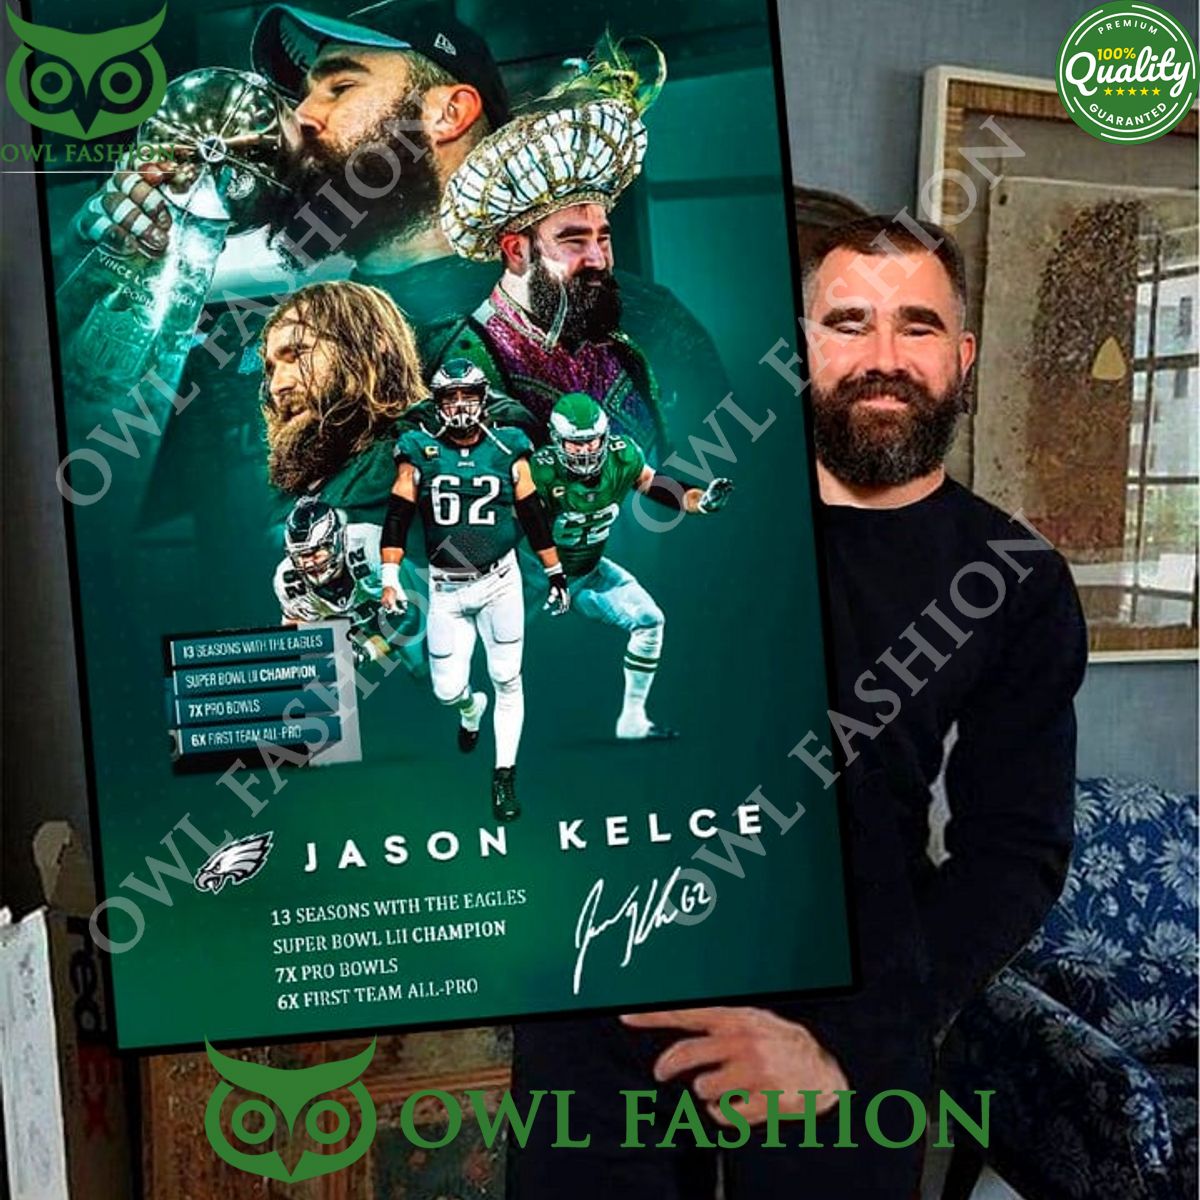 Jason Kelce 13 seasons with the Eagles Super Bowl LII Champion Legender poster